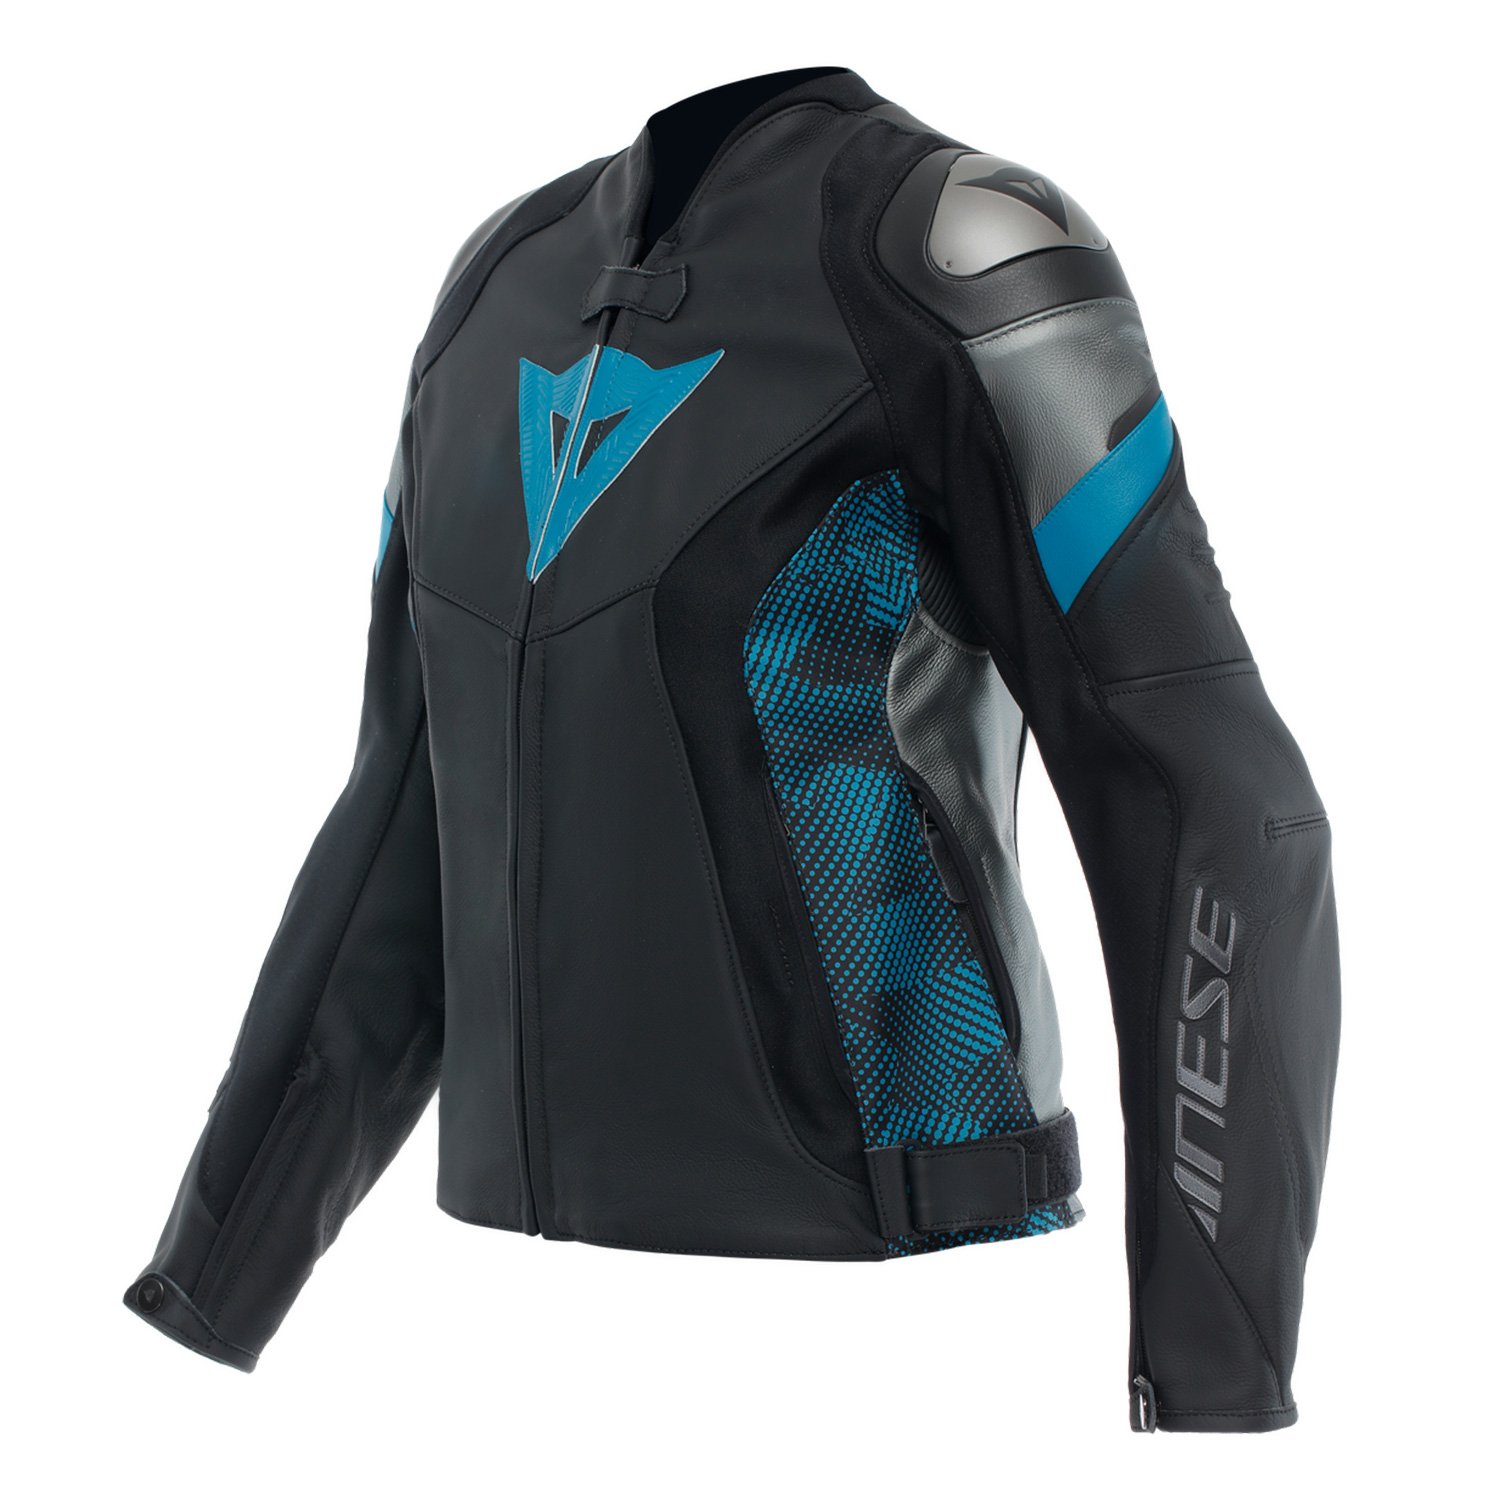 Image of Dainese Avro 5 Leather Jacket WMN Black Teal Anthracite Größe 44